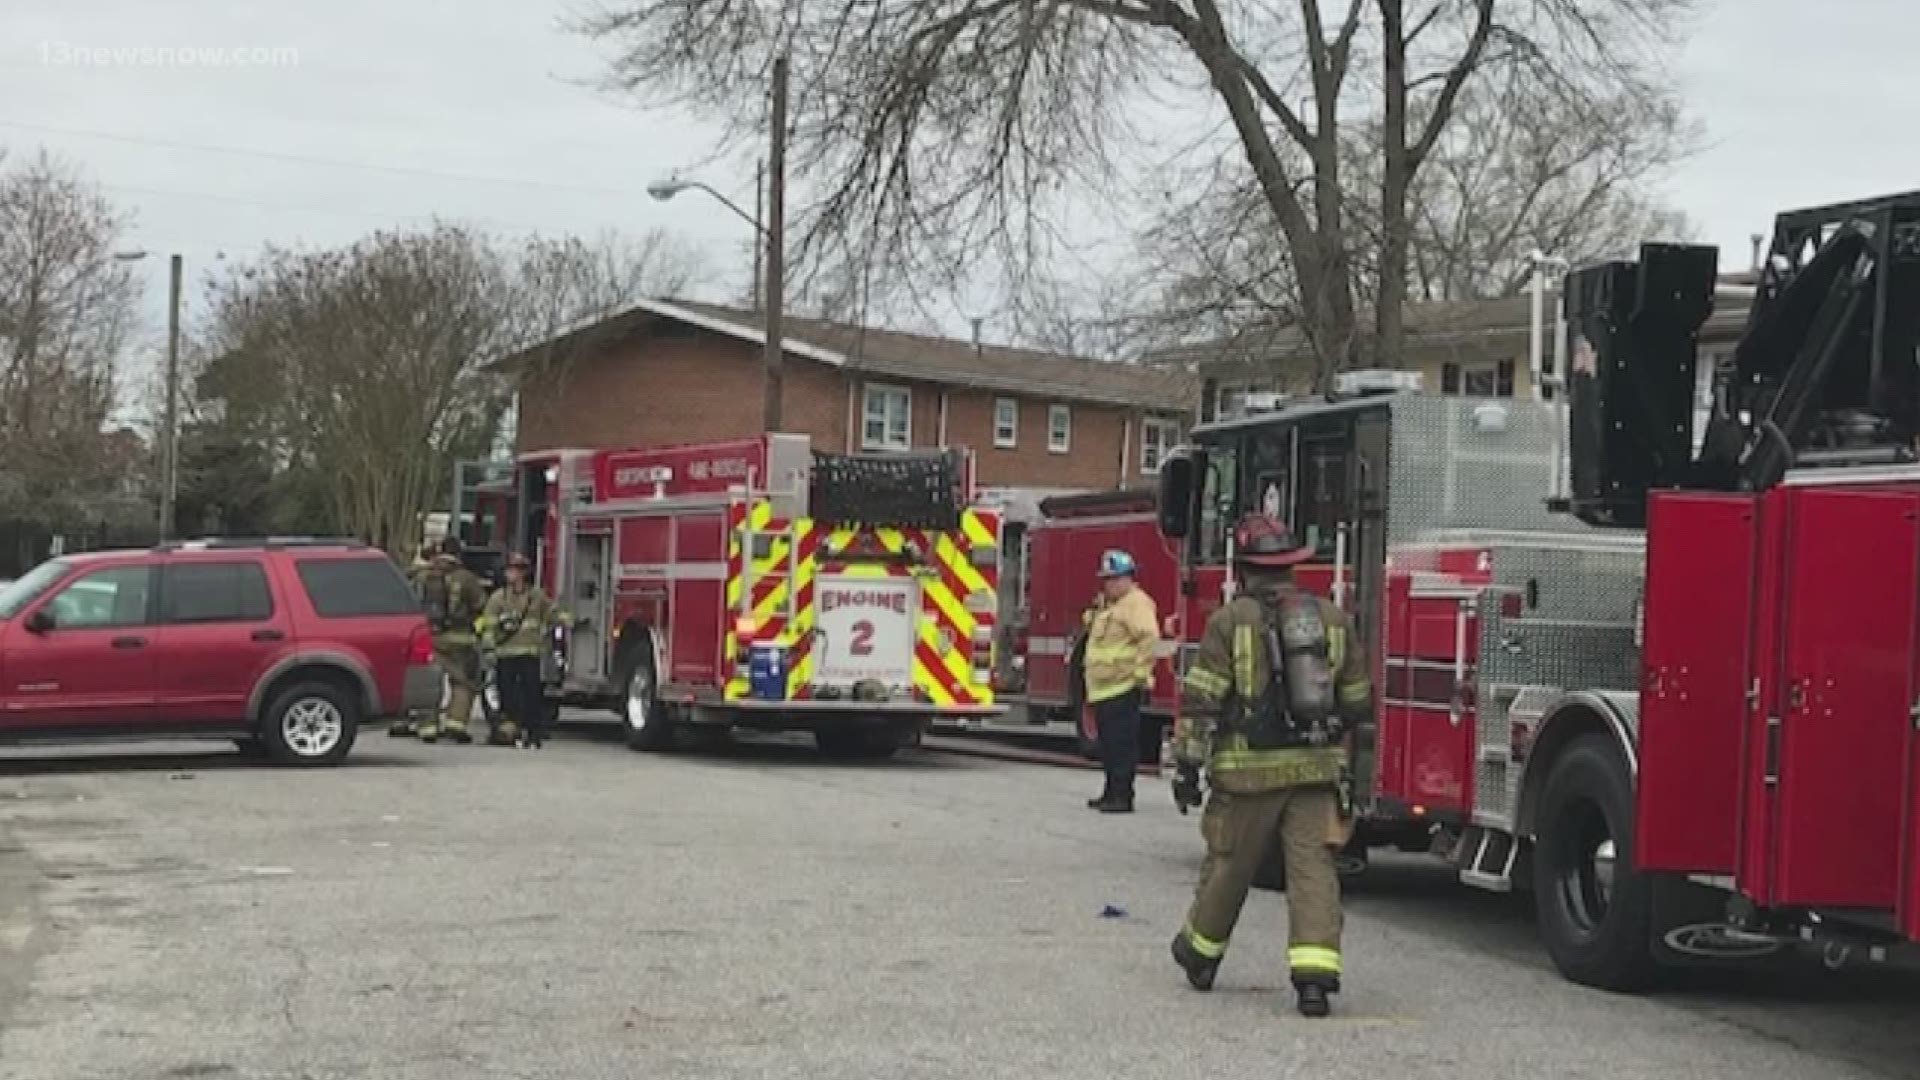 A working smoke detector alerted the family to get out in time.